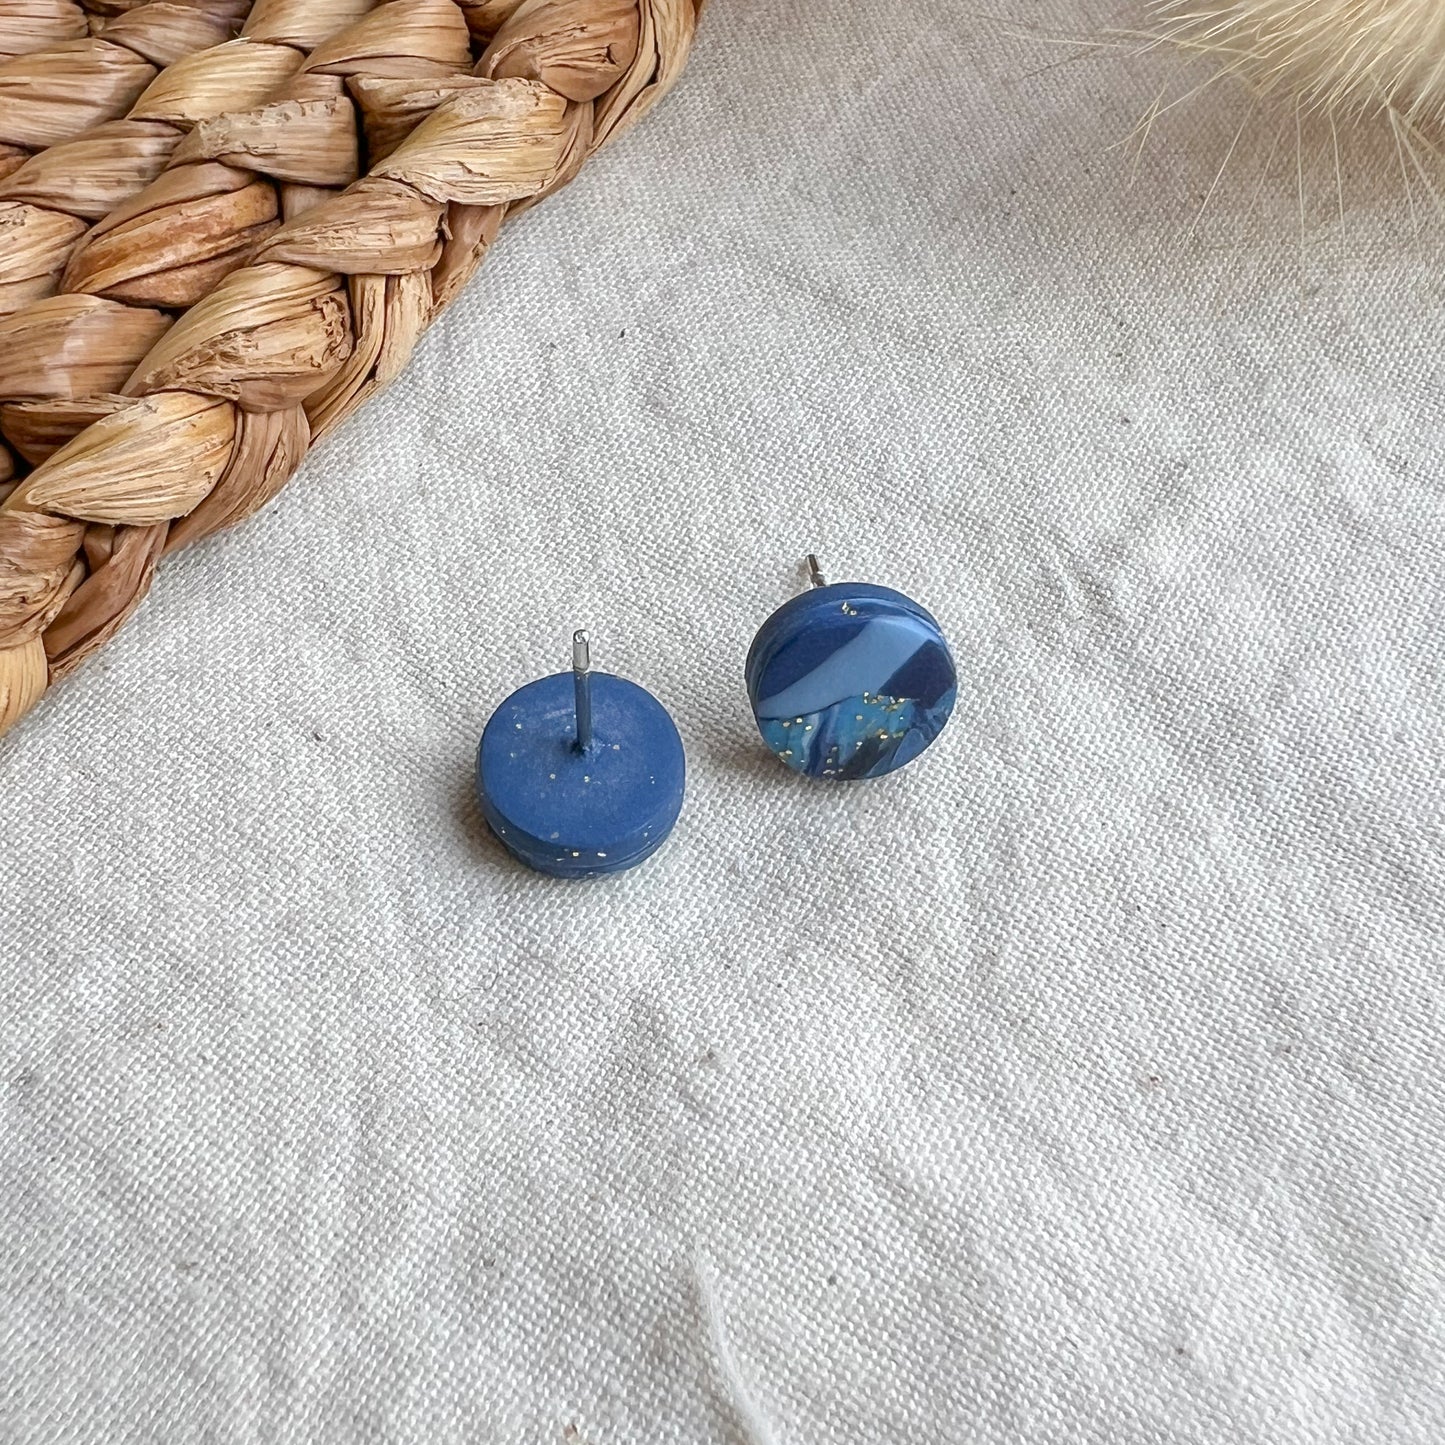 ROUND | Small round stud earrings in mussel shell marble blue